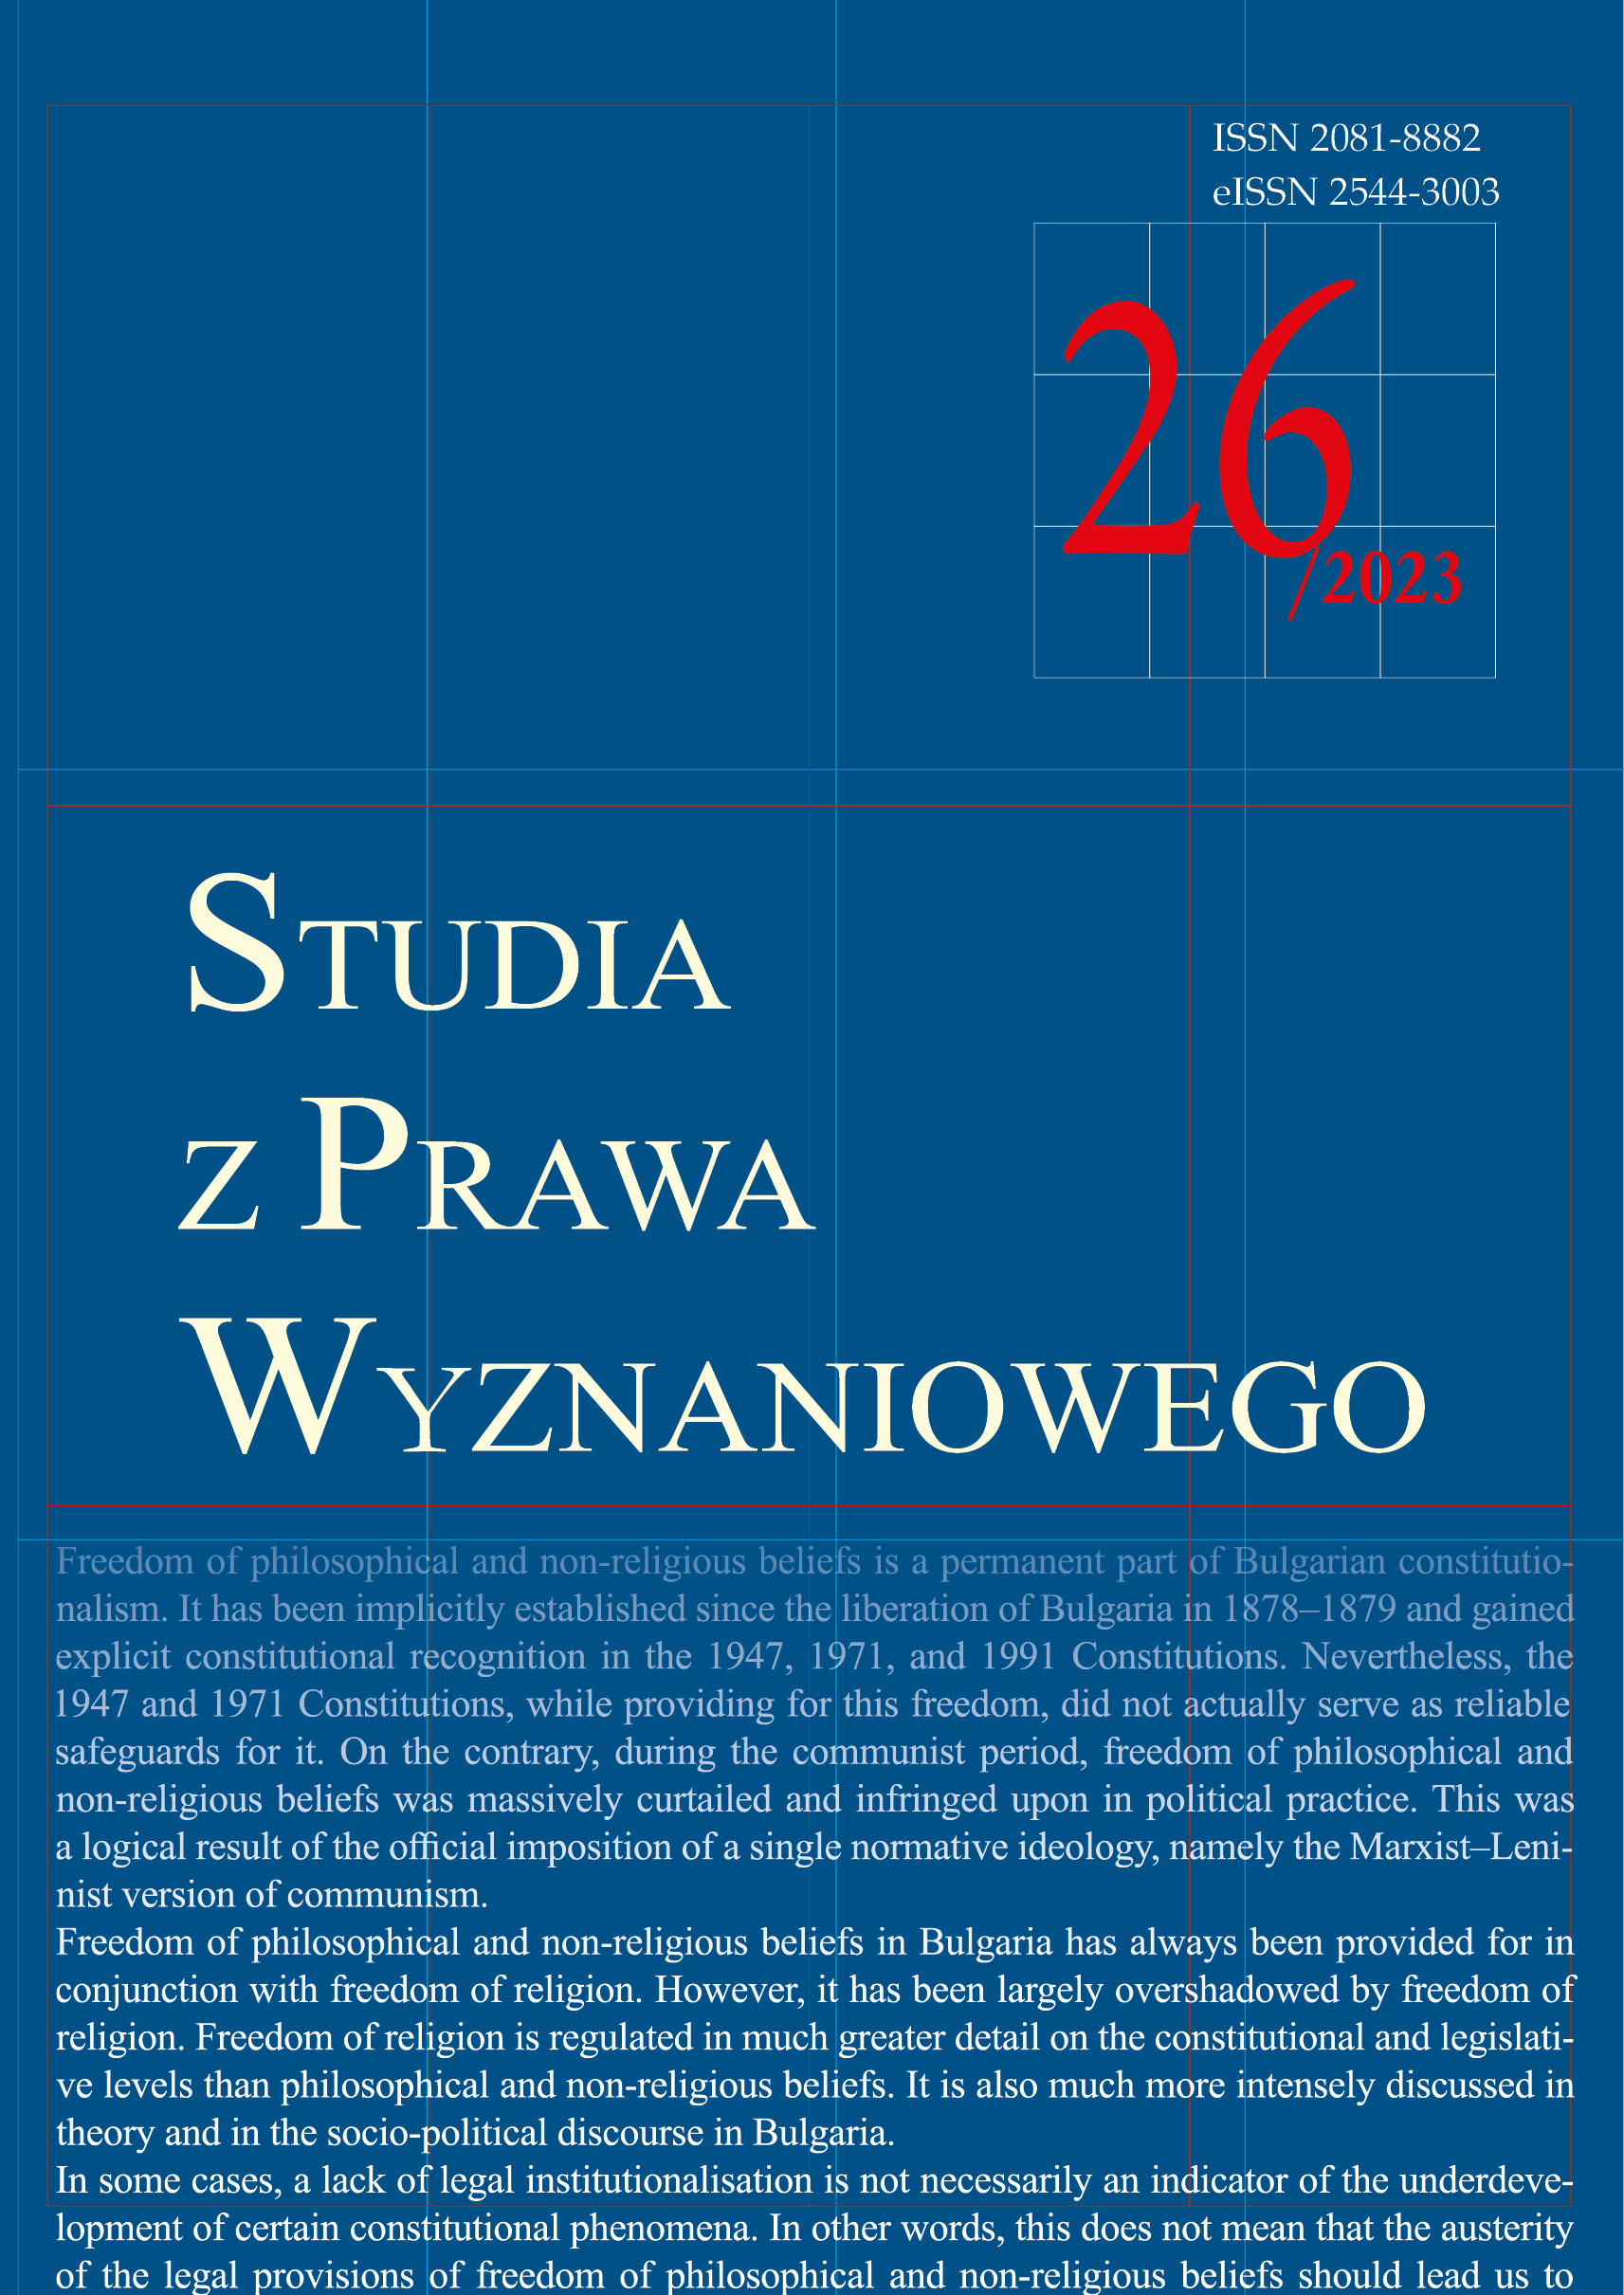 “Cases of clericalism” among students of Szczecin Law School (1950–1951) and their disciplinary consequences Cover Image